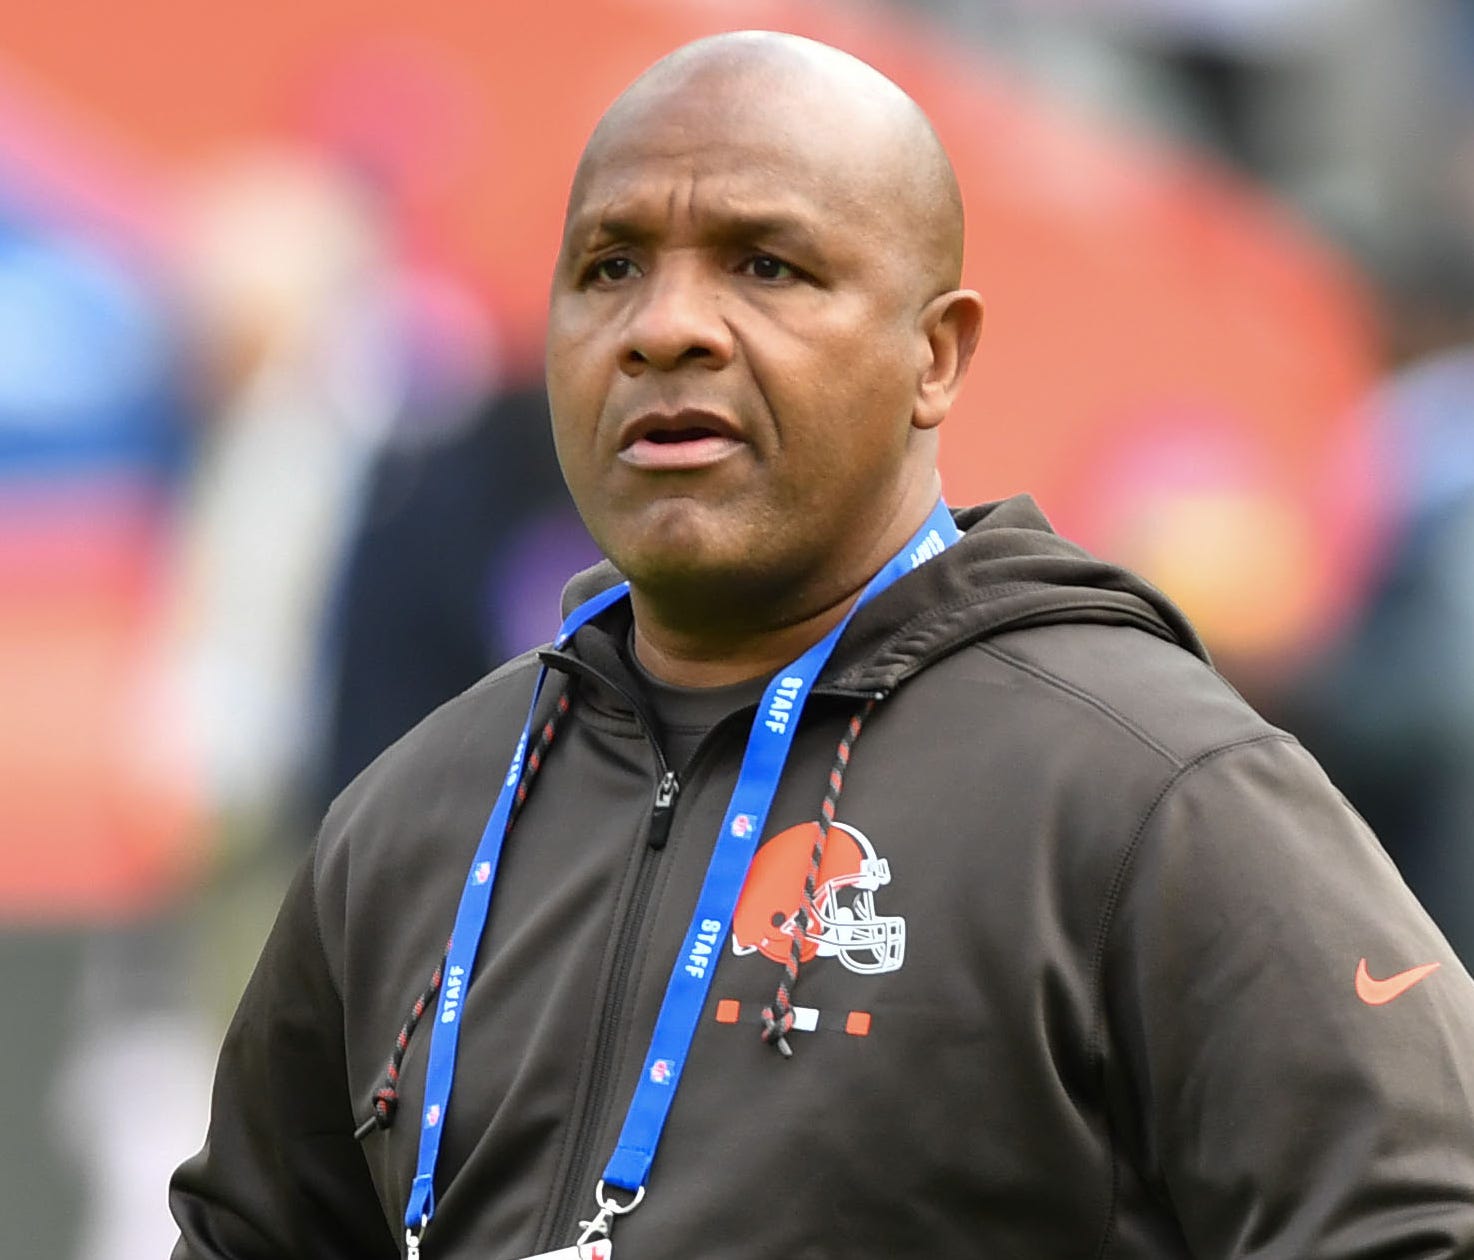 For the second straight year, Browns coach Hue Jackson is in jeopardy of having a winless season.